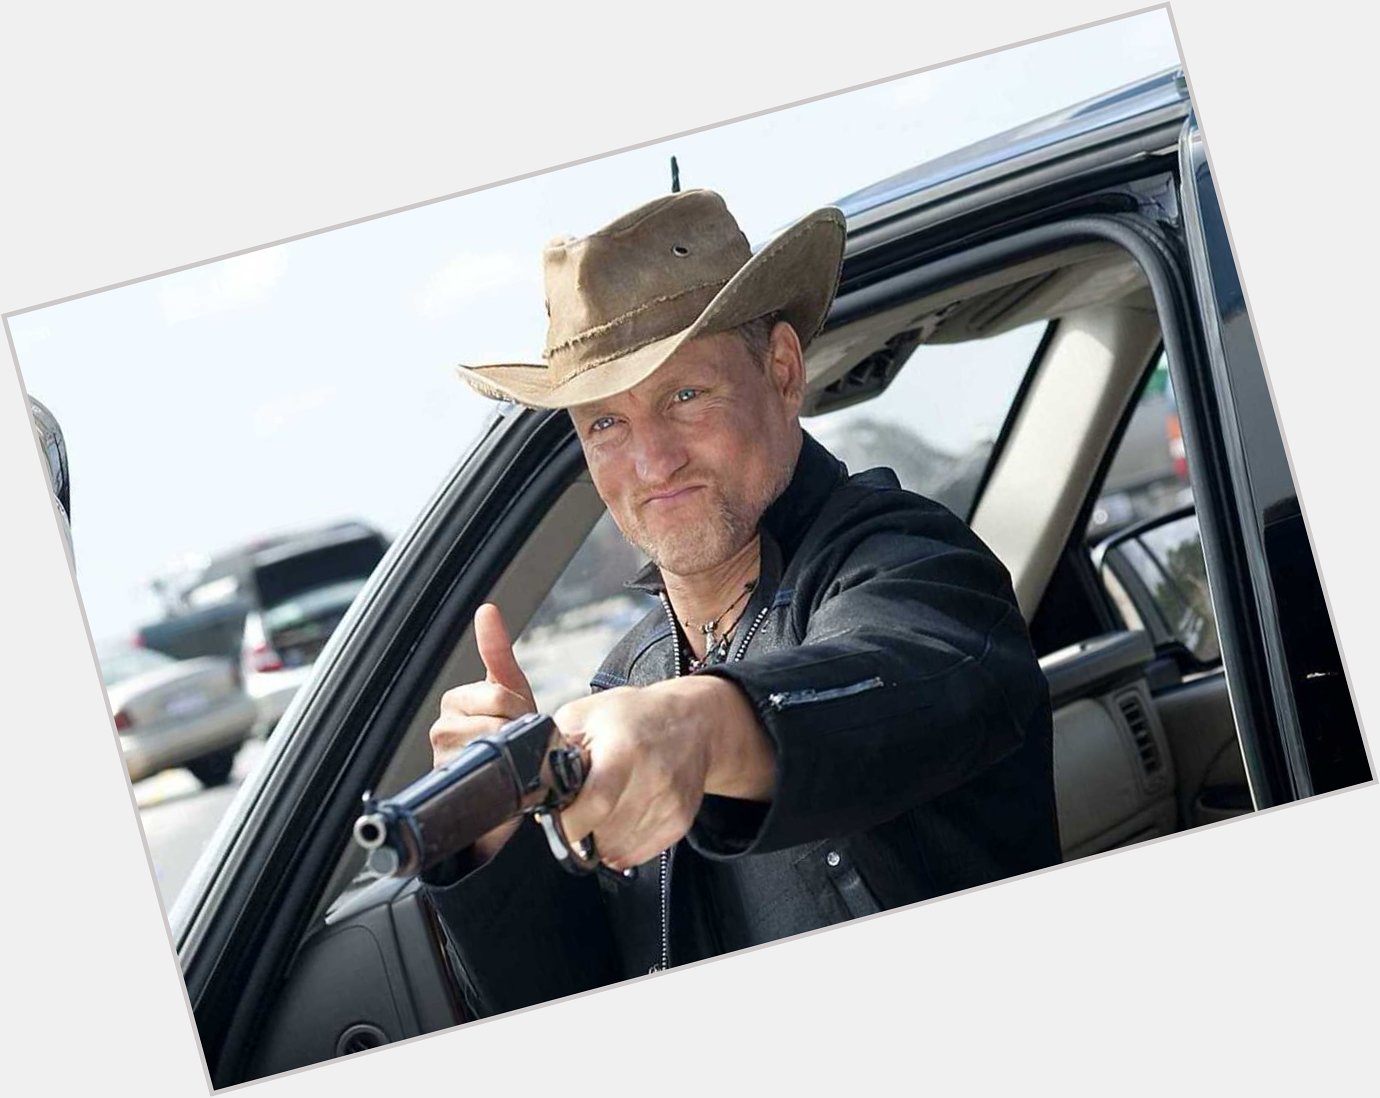 Happy 58th birthday to ZOMBIELAND star Woody Harrelson!

Who else is stoked to see ZOMBIELAND: DOUBLE TAP? 